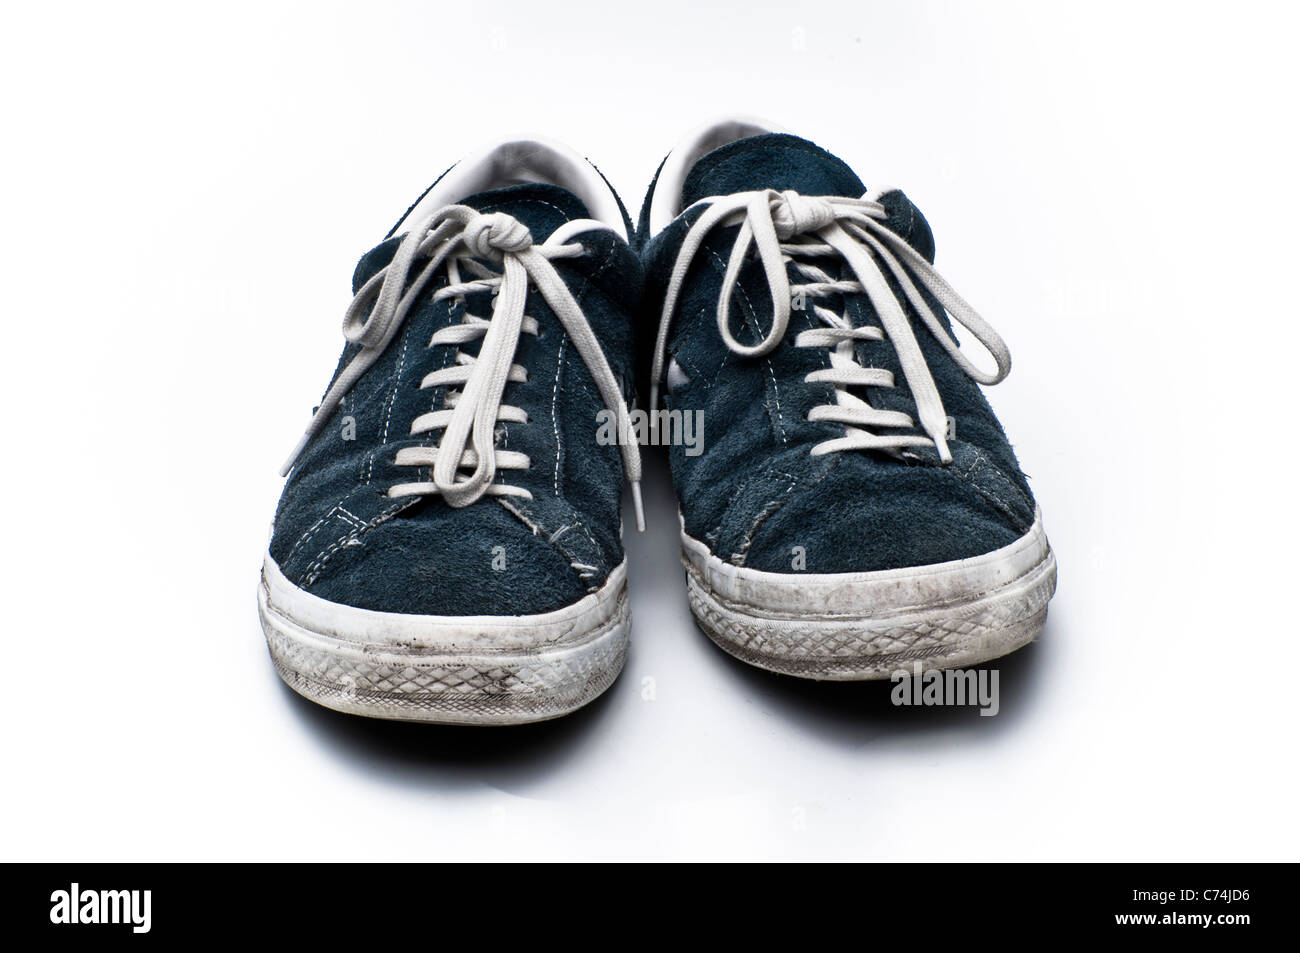 Converse blue suede One Star sneakers Stock Photo - Alamy